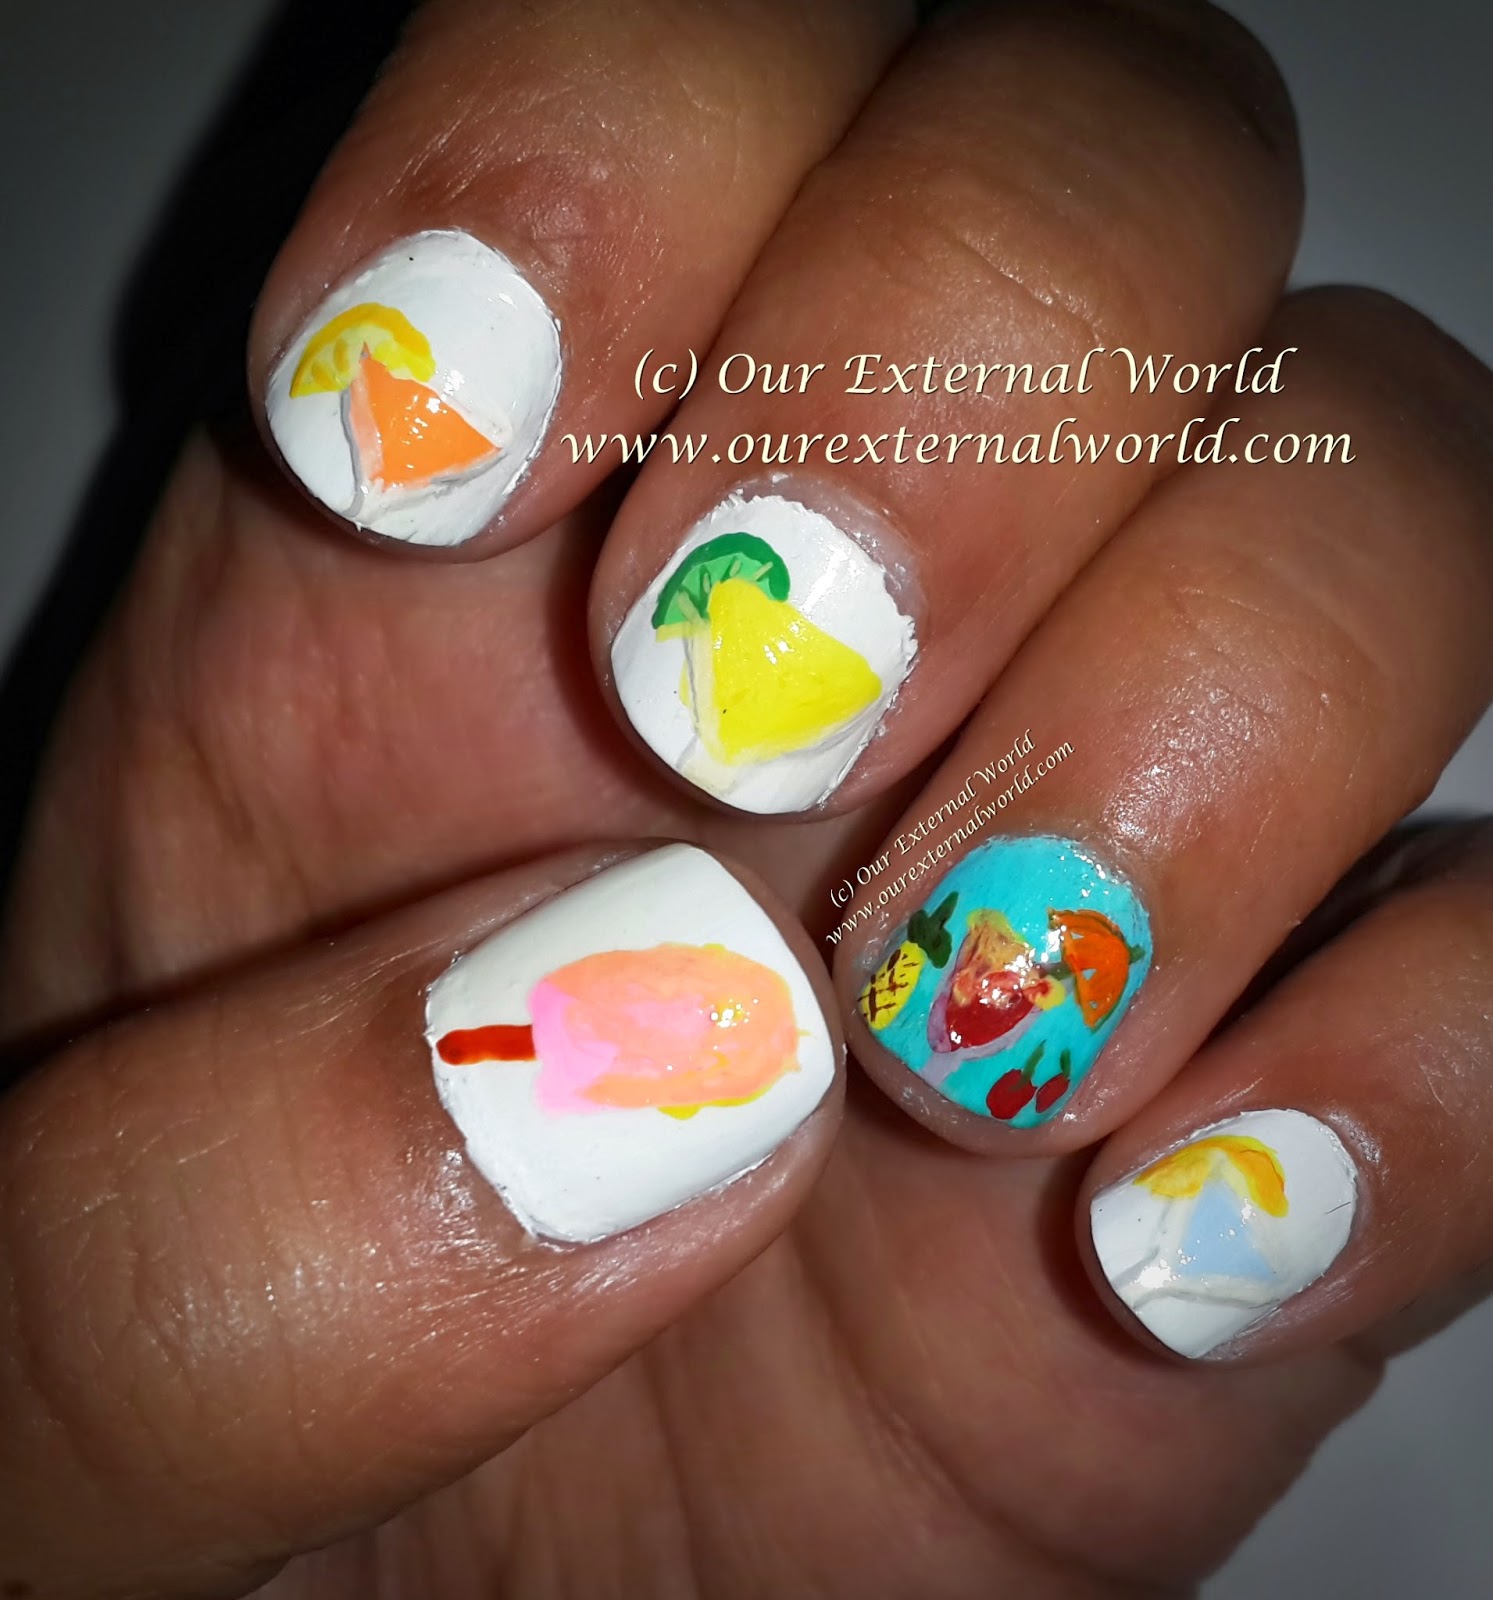 Summer Nail Art Challenge - Chill Me - Ice-cream & Cocktail Nail Art